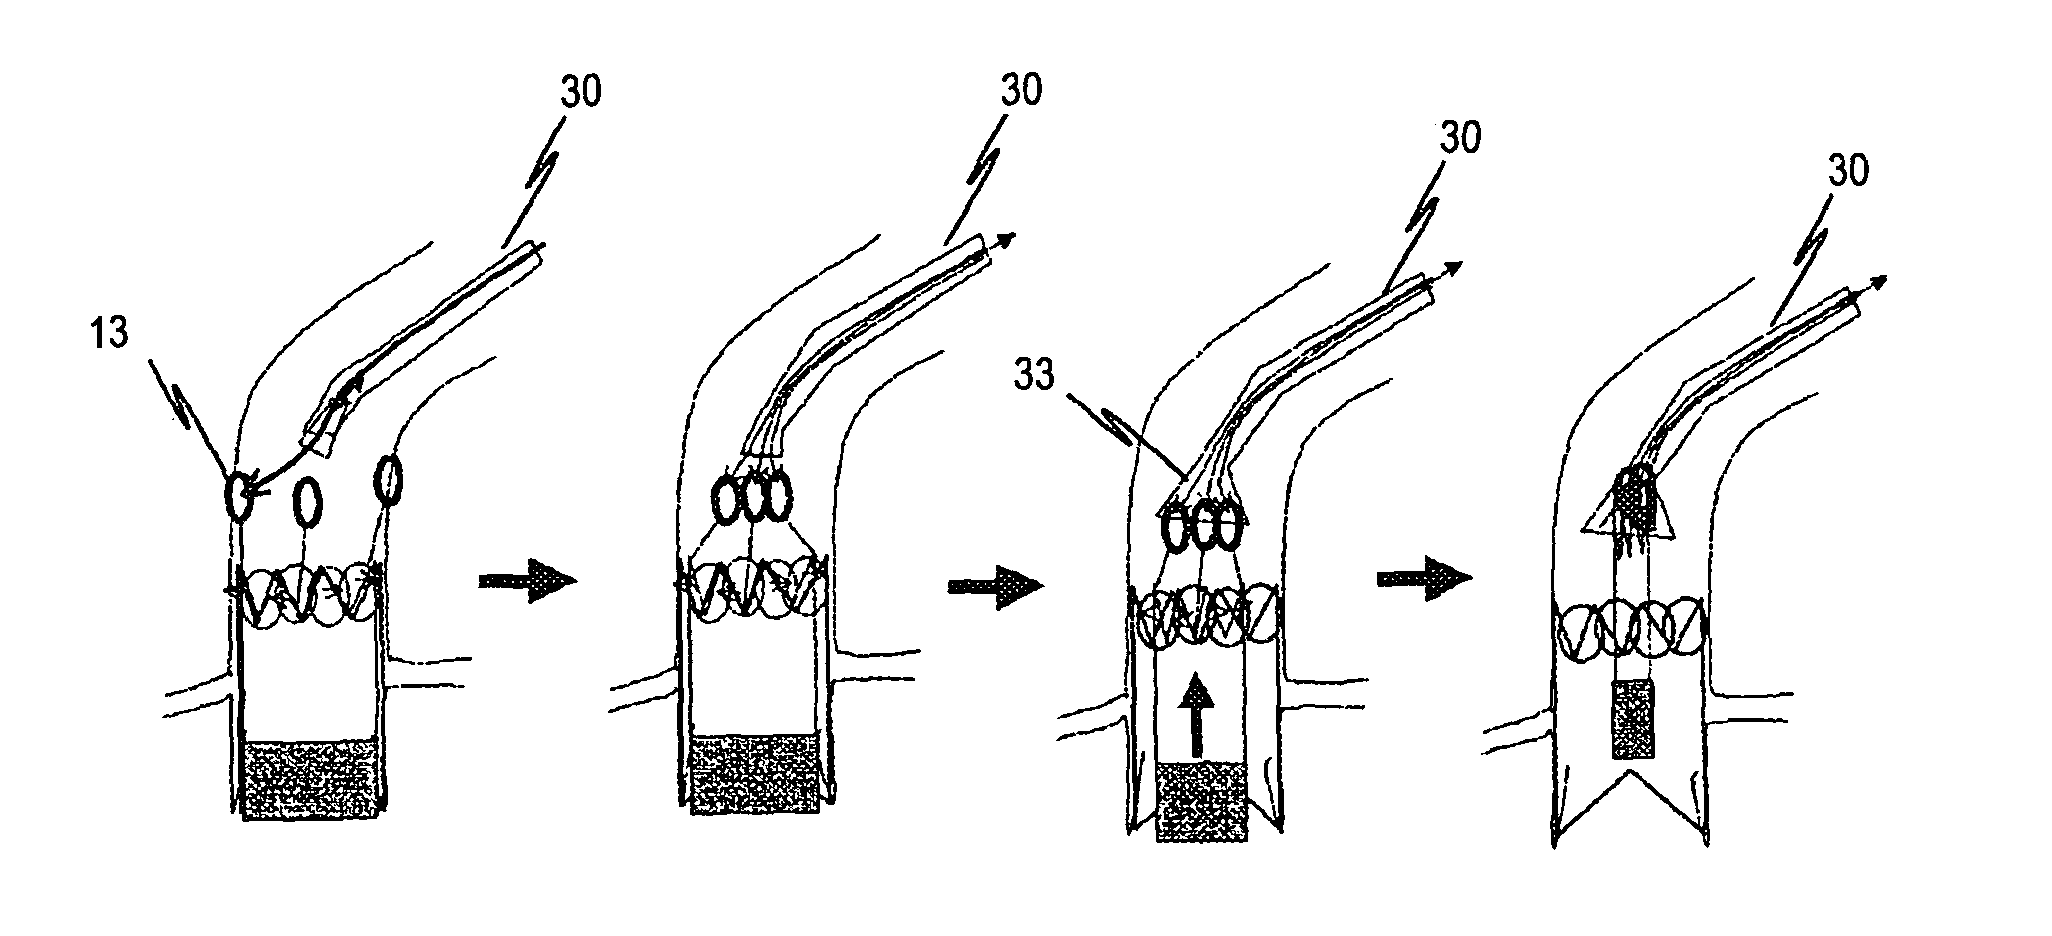 Device for the implantation and fixation of prosthetic valves